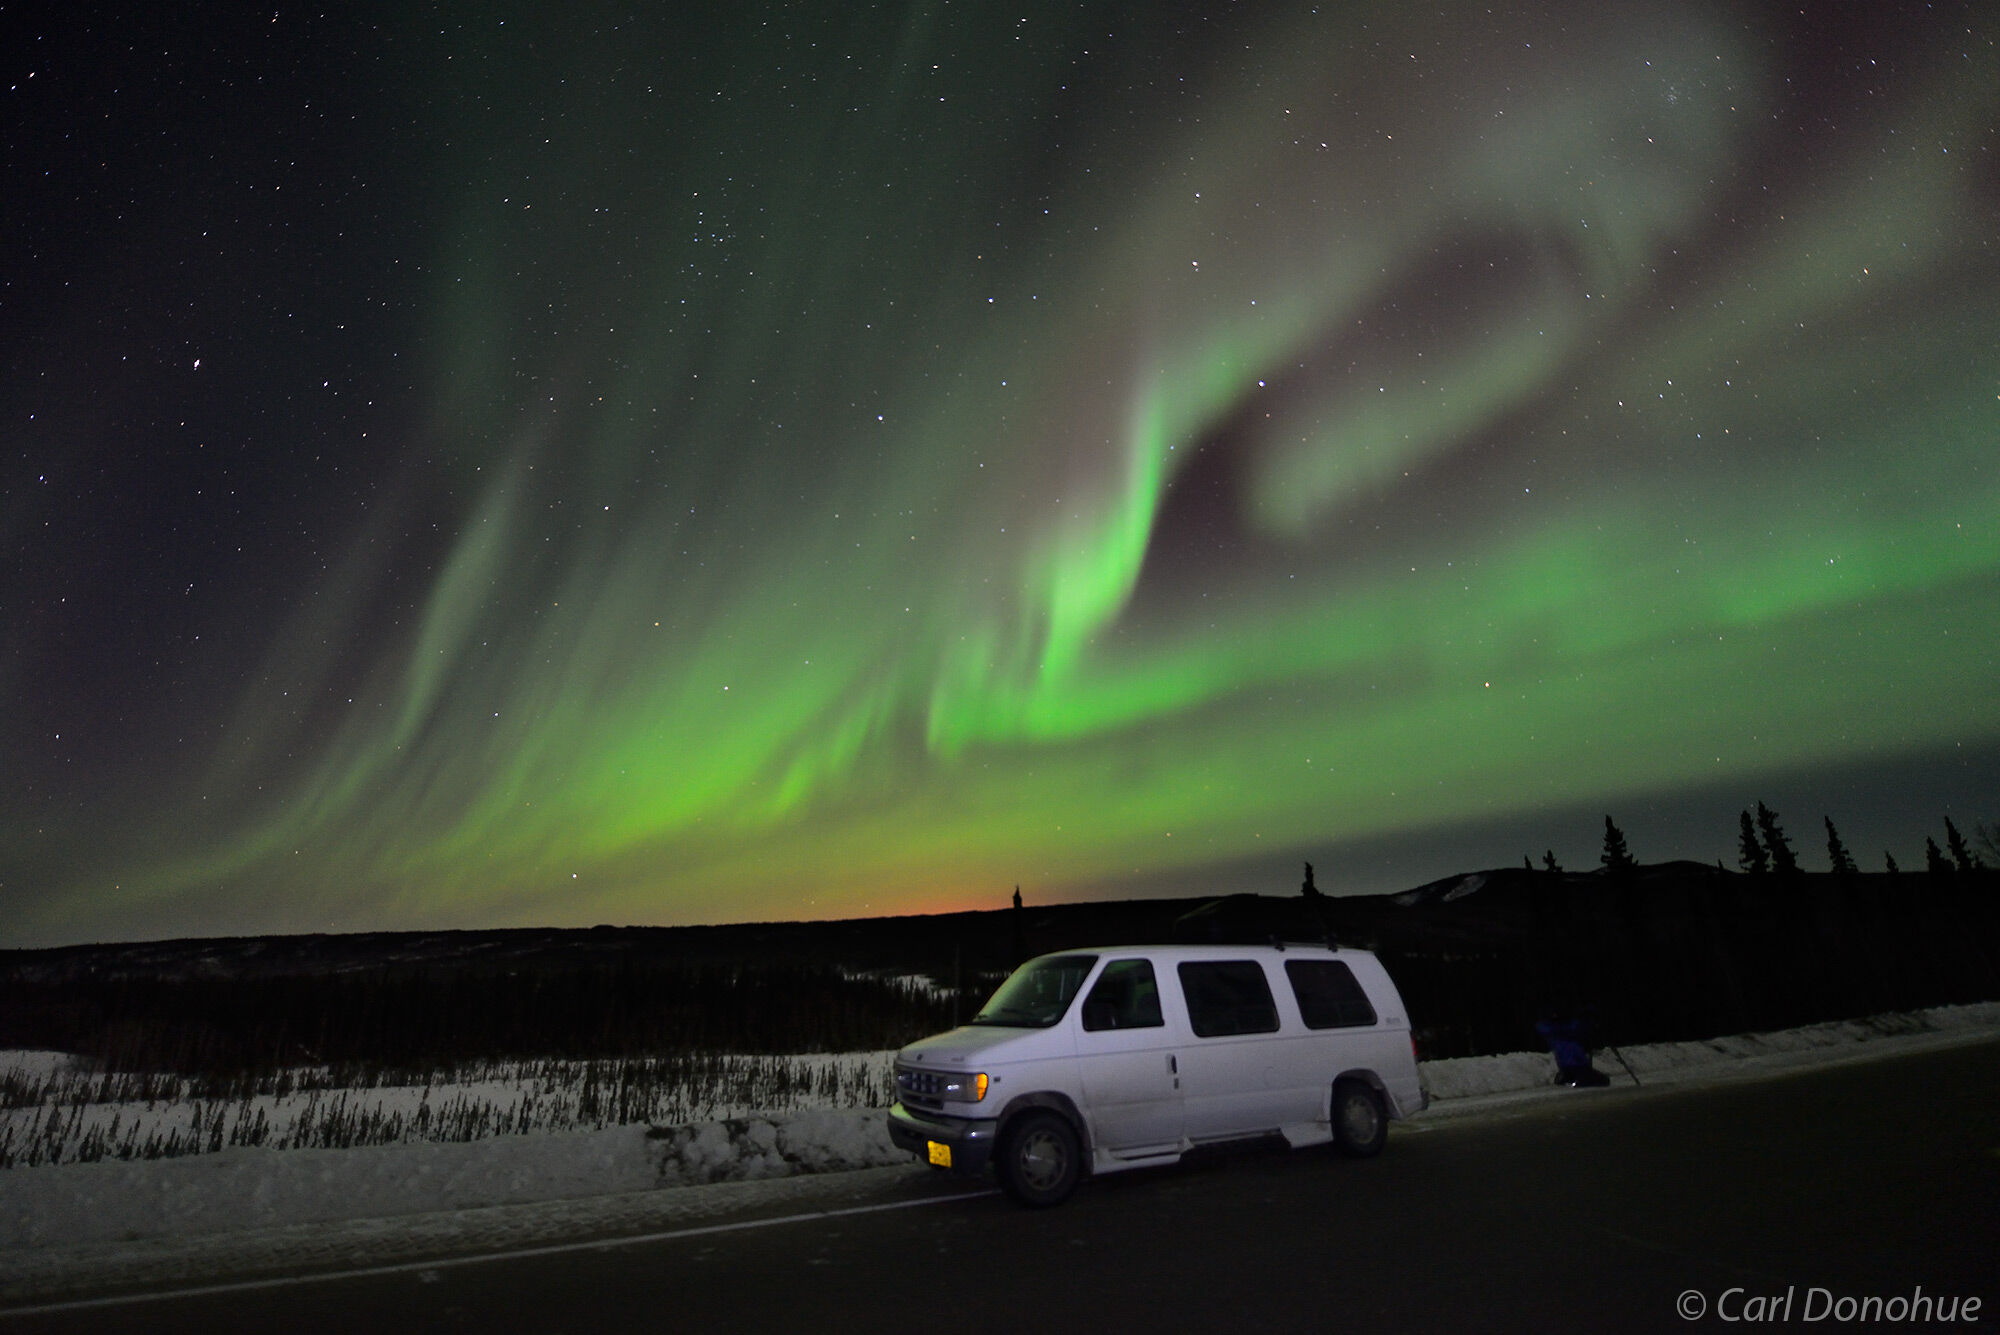 The aurora borealis over a Ford van used for photo tours on the Elliot highway, in subarctic Alaska.